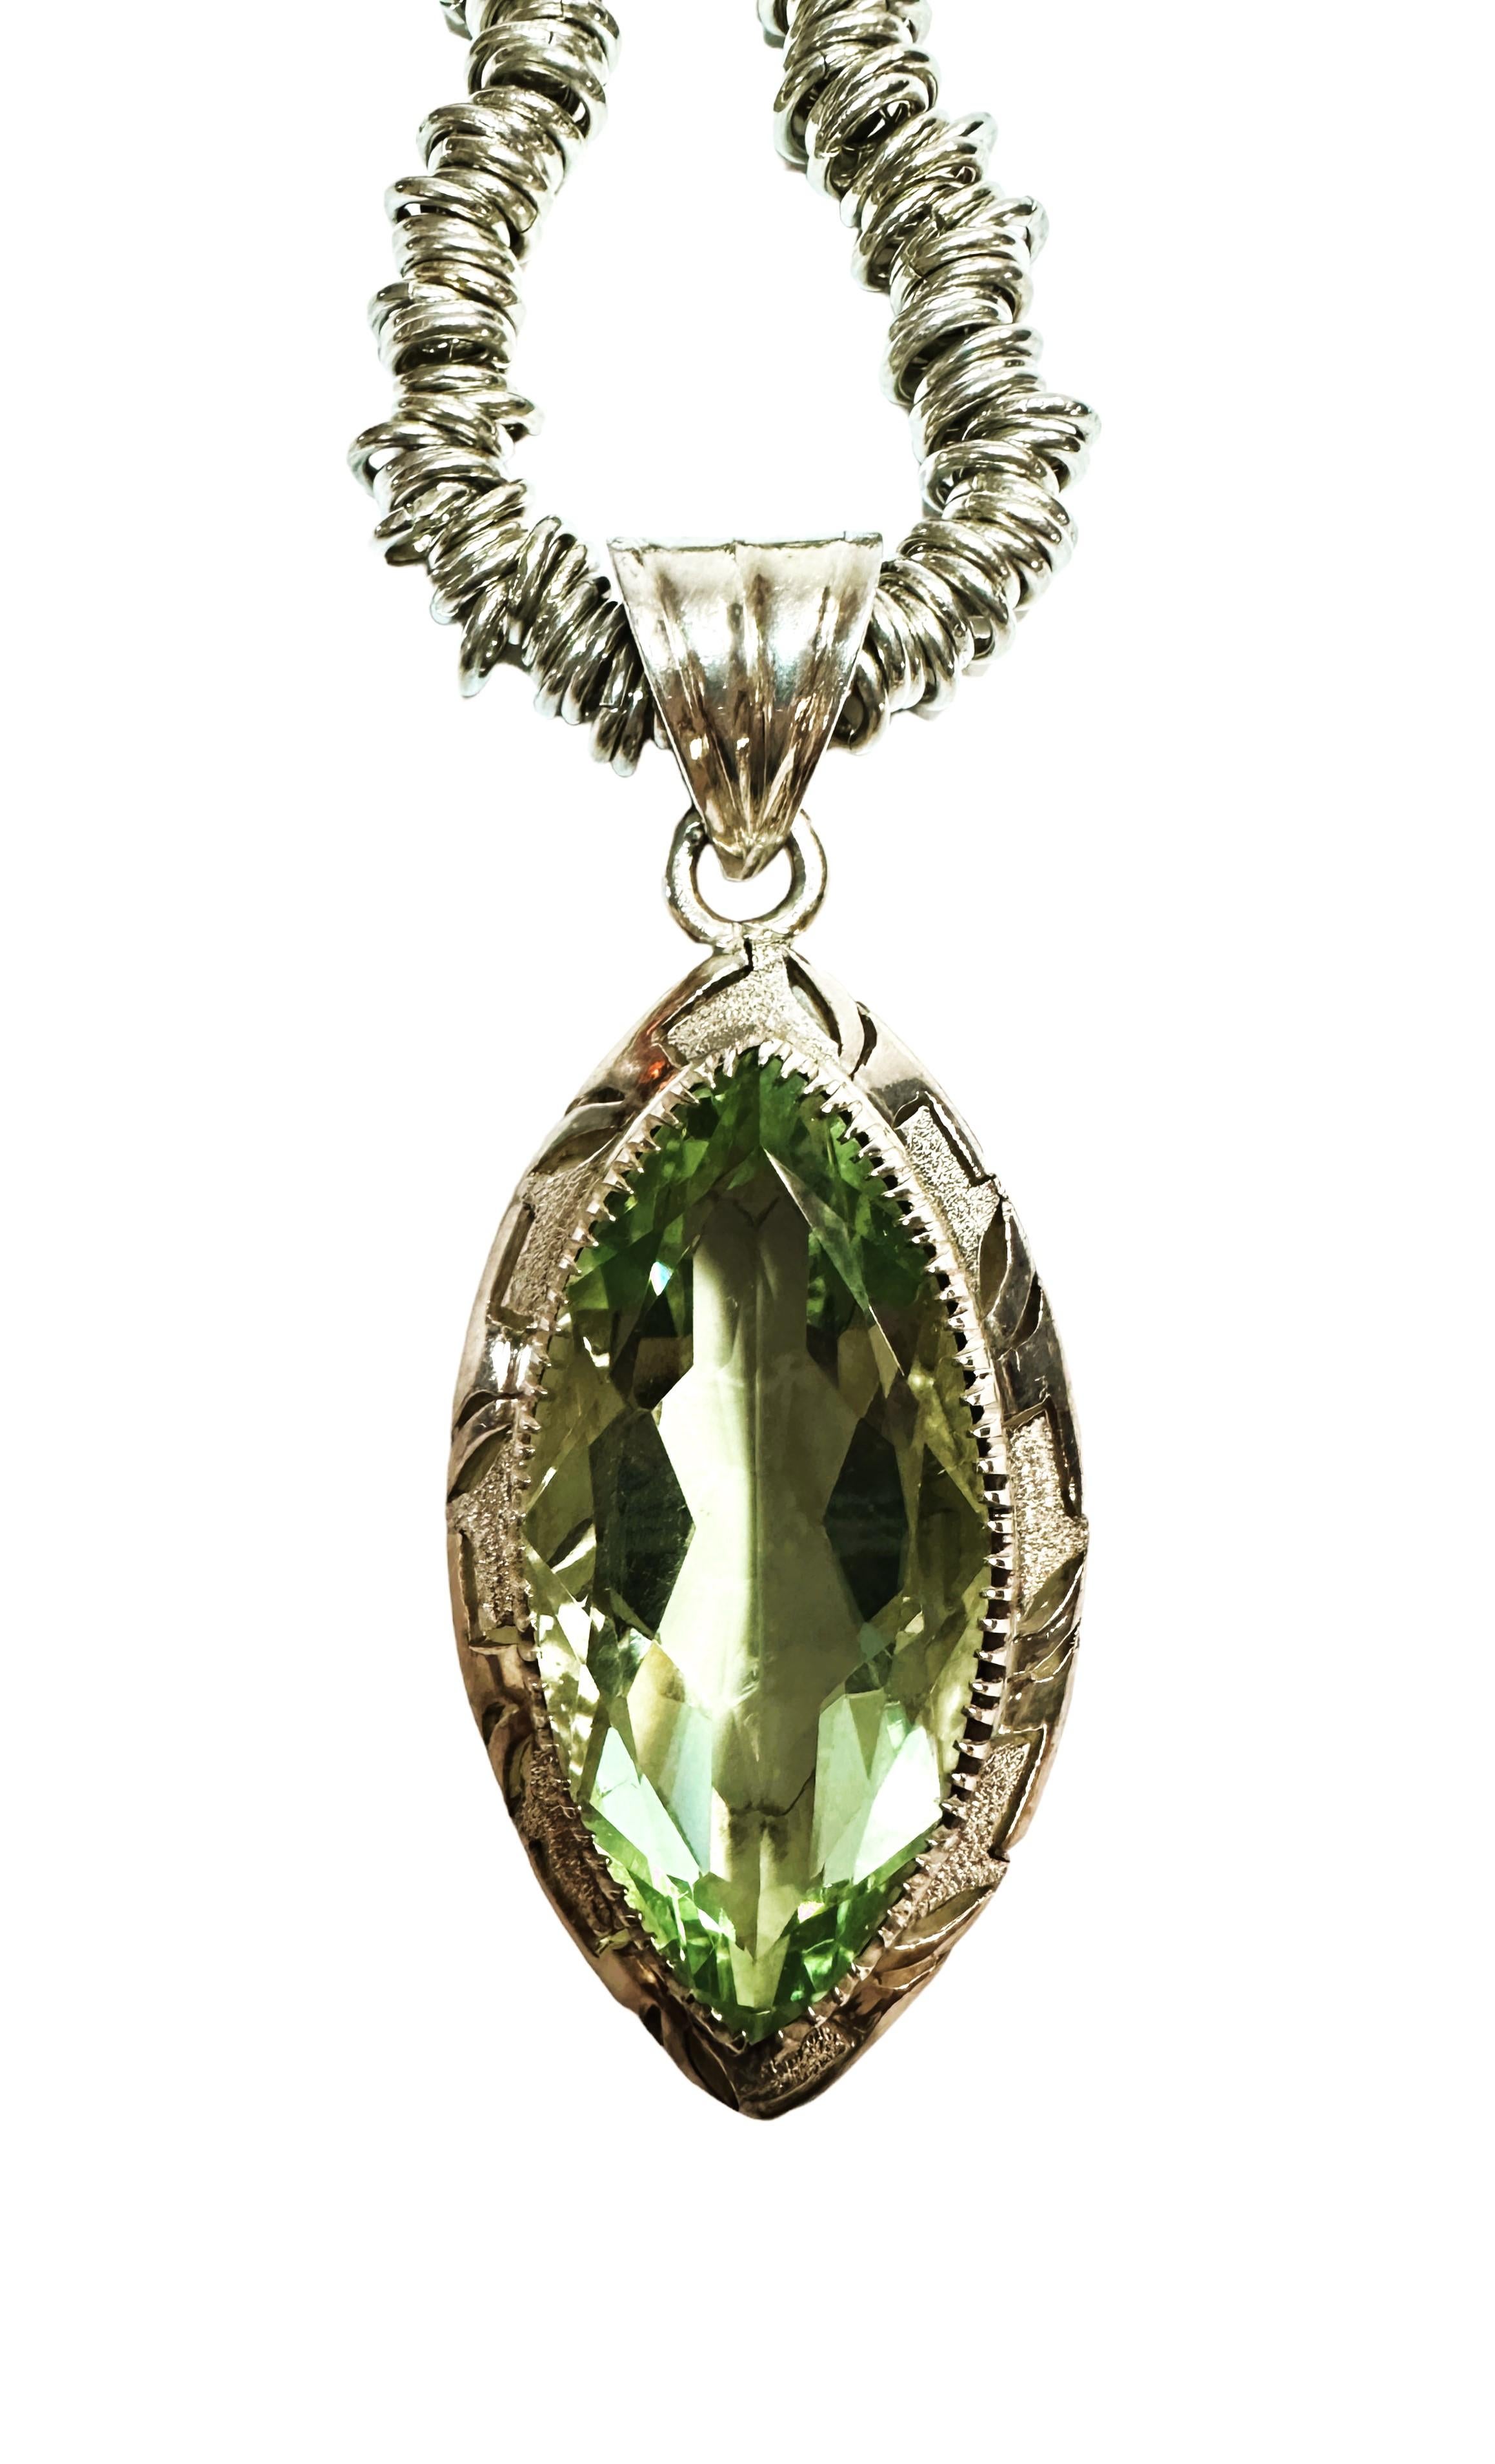 Marquise Cut Handmade 16 Inch Ornate Sterling Silver Pendant Necklace with Green Quartz For Sale